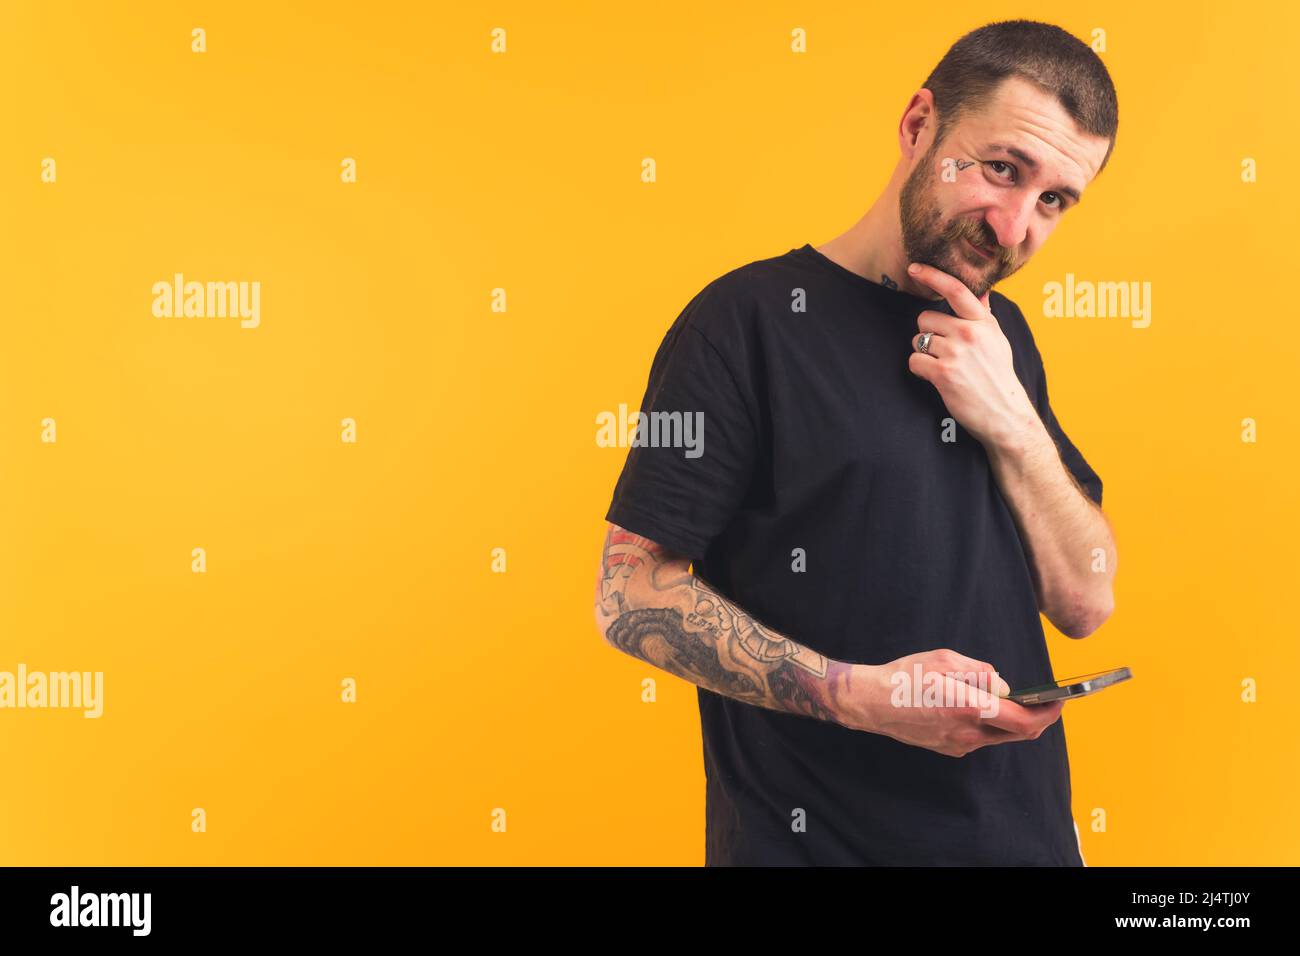 Smiley friendly bearded caucasian guy with tattoos holding smartphone in one hand and touching his beard with the other while looking at camera. Isolated studio shot over yellow background. High quality photo Stock Photo